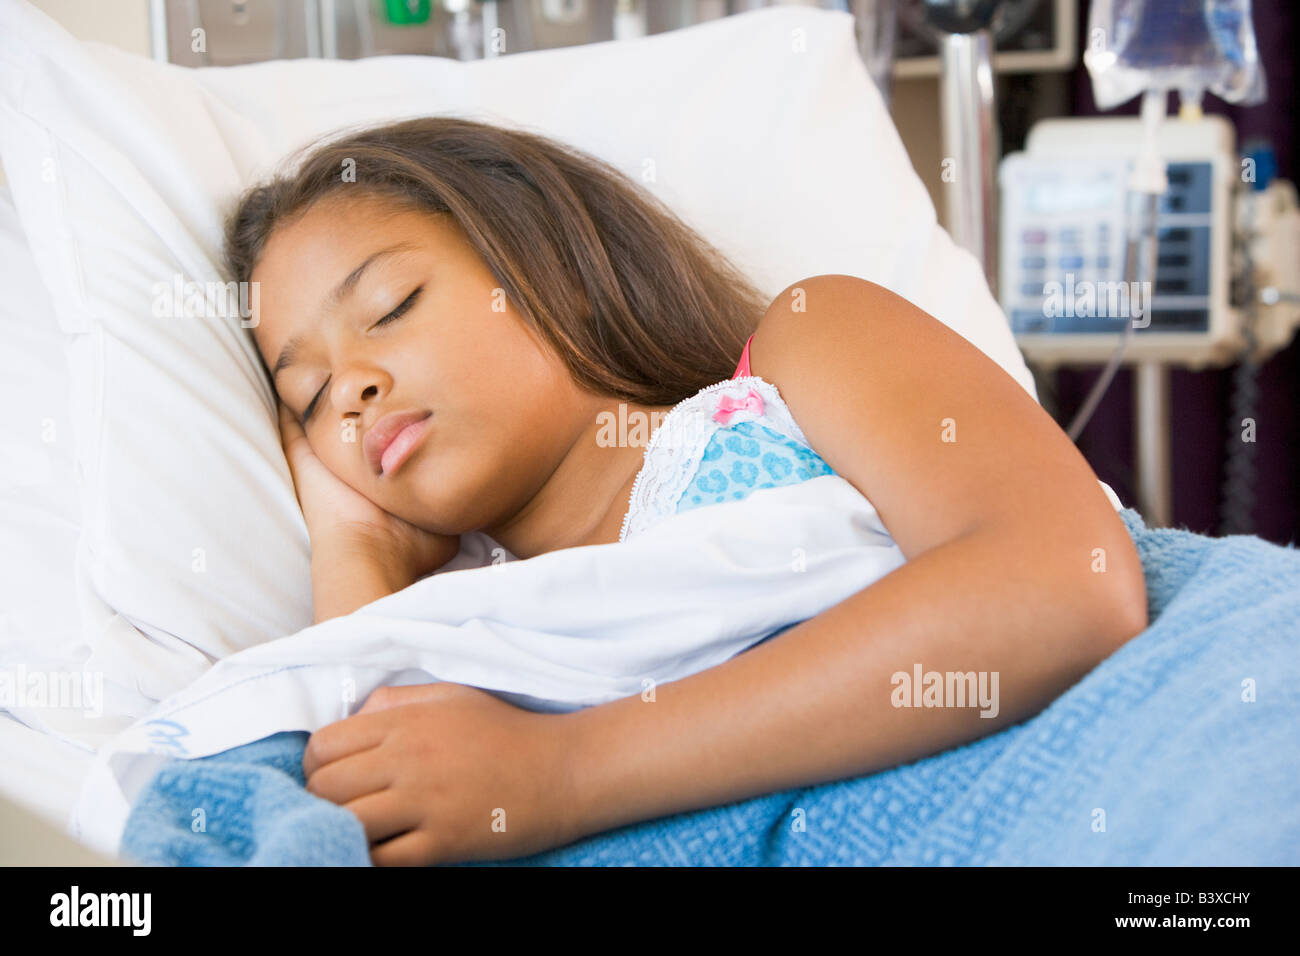 Young Girl Sleeping In Hospital Bed Stock Photo